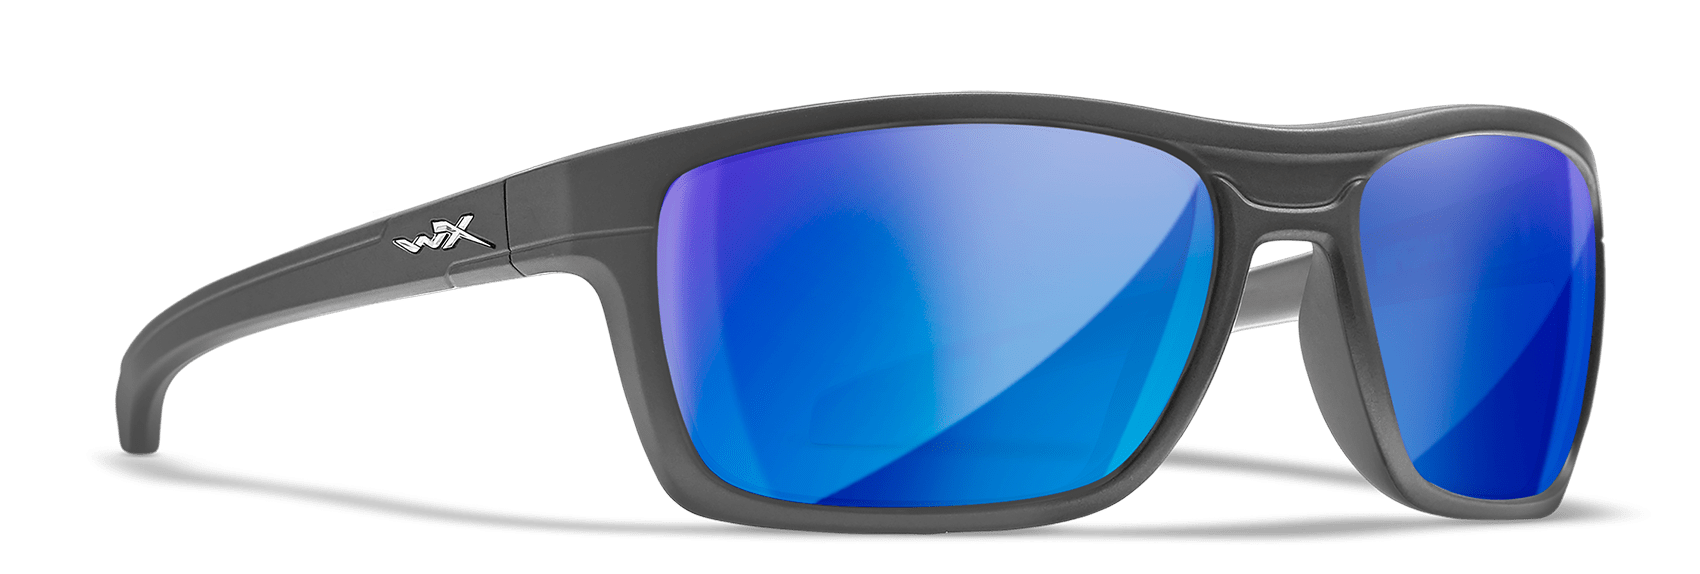 Wiley X Kingpin Sunglasses with Matte Graphite Frame and Polarized Blue Mirror Lens Front Left